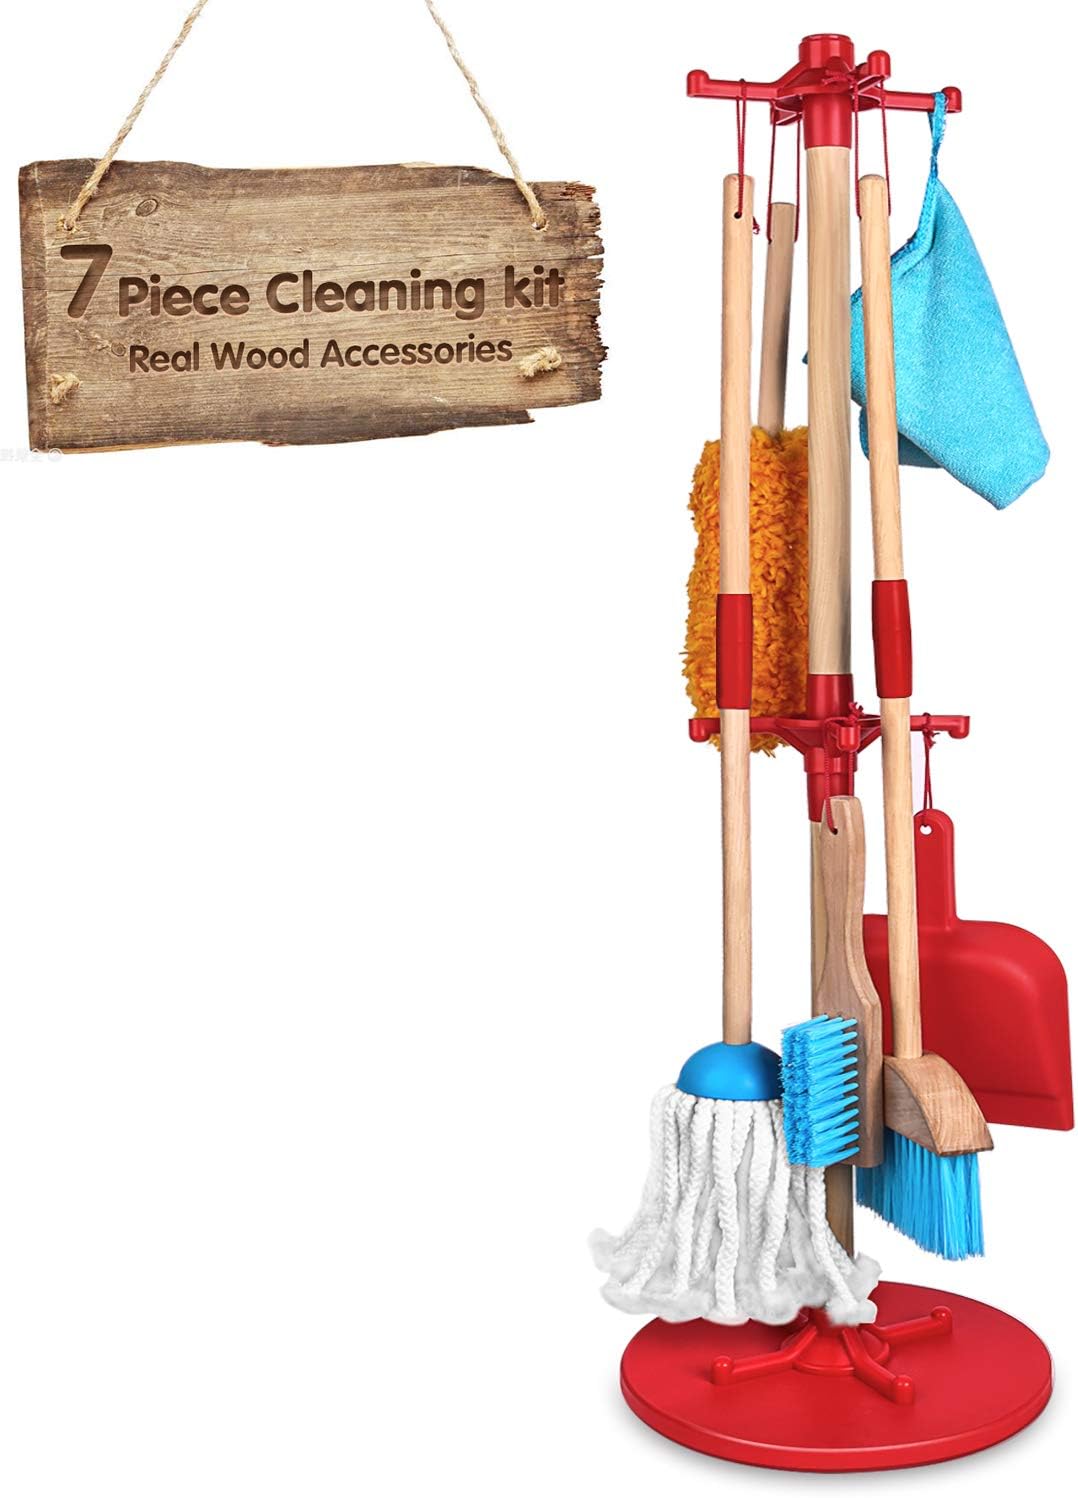 Kids Kitchen Cleaning Set - 7 Piece Kitchen Cleaning Toys Includes Broom, Mop, Duster, Dustpan, Brush, Rag and Hanging Stand, - Kitchen Toy Toddler Cleaning Set Gift for Toddler Girls & Boys